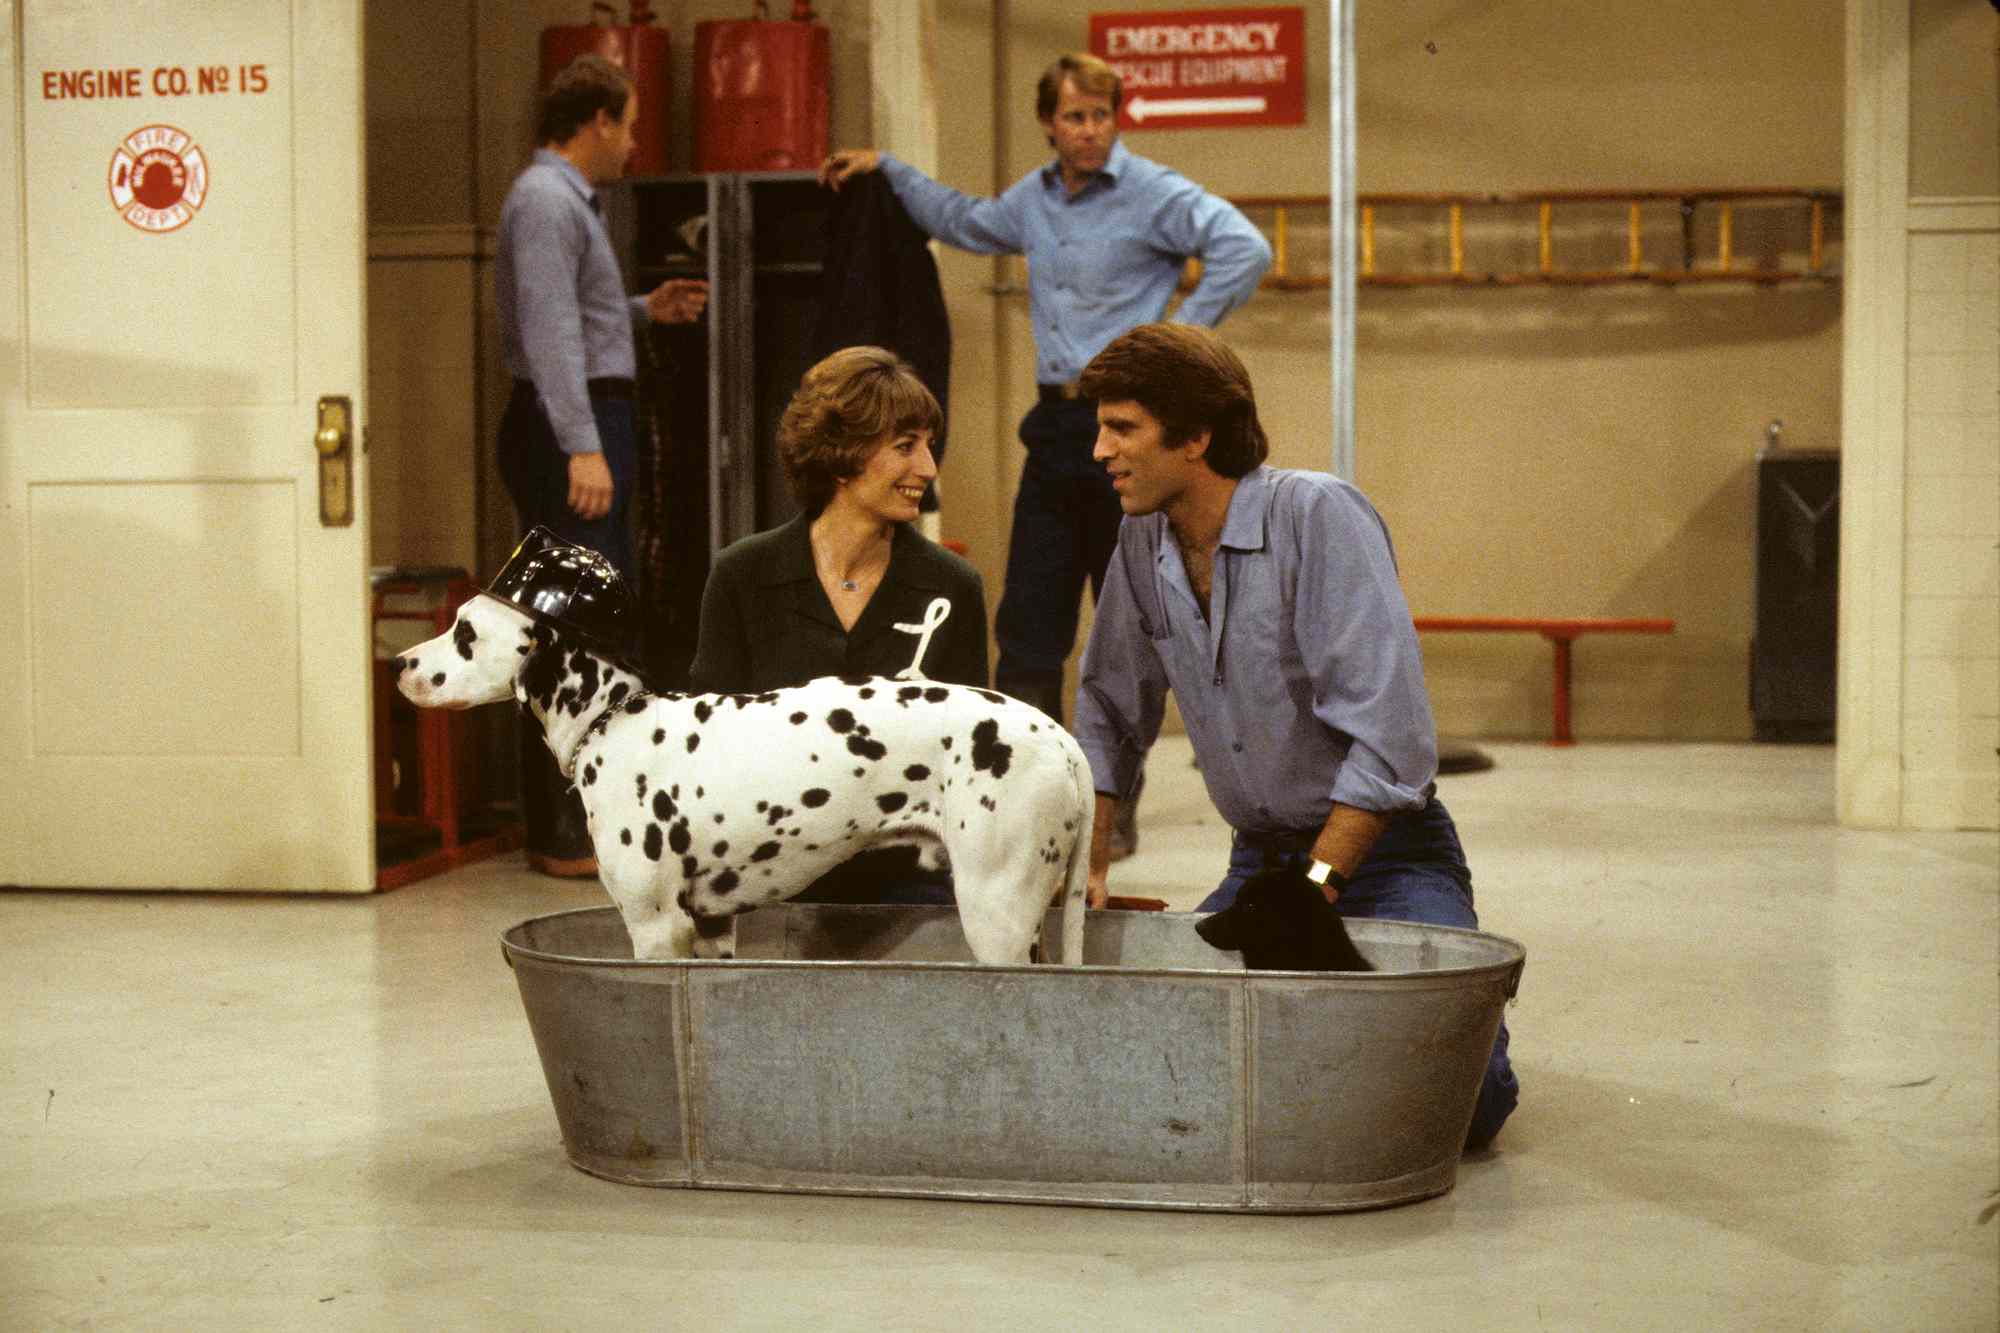 LAVERNE & SHIRLEY - "Why Did the Fisherman..." - Airdate: February 4, 1980.